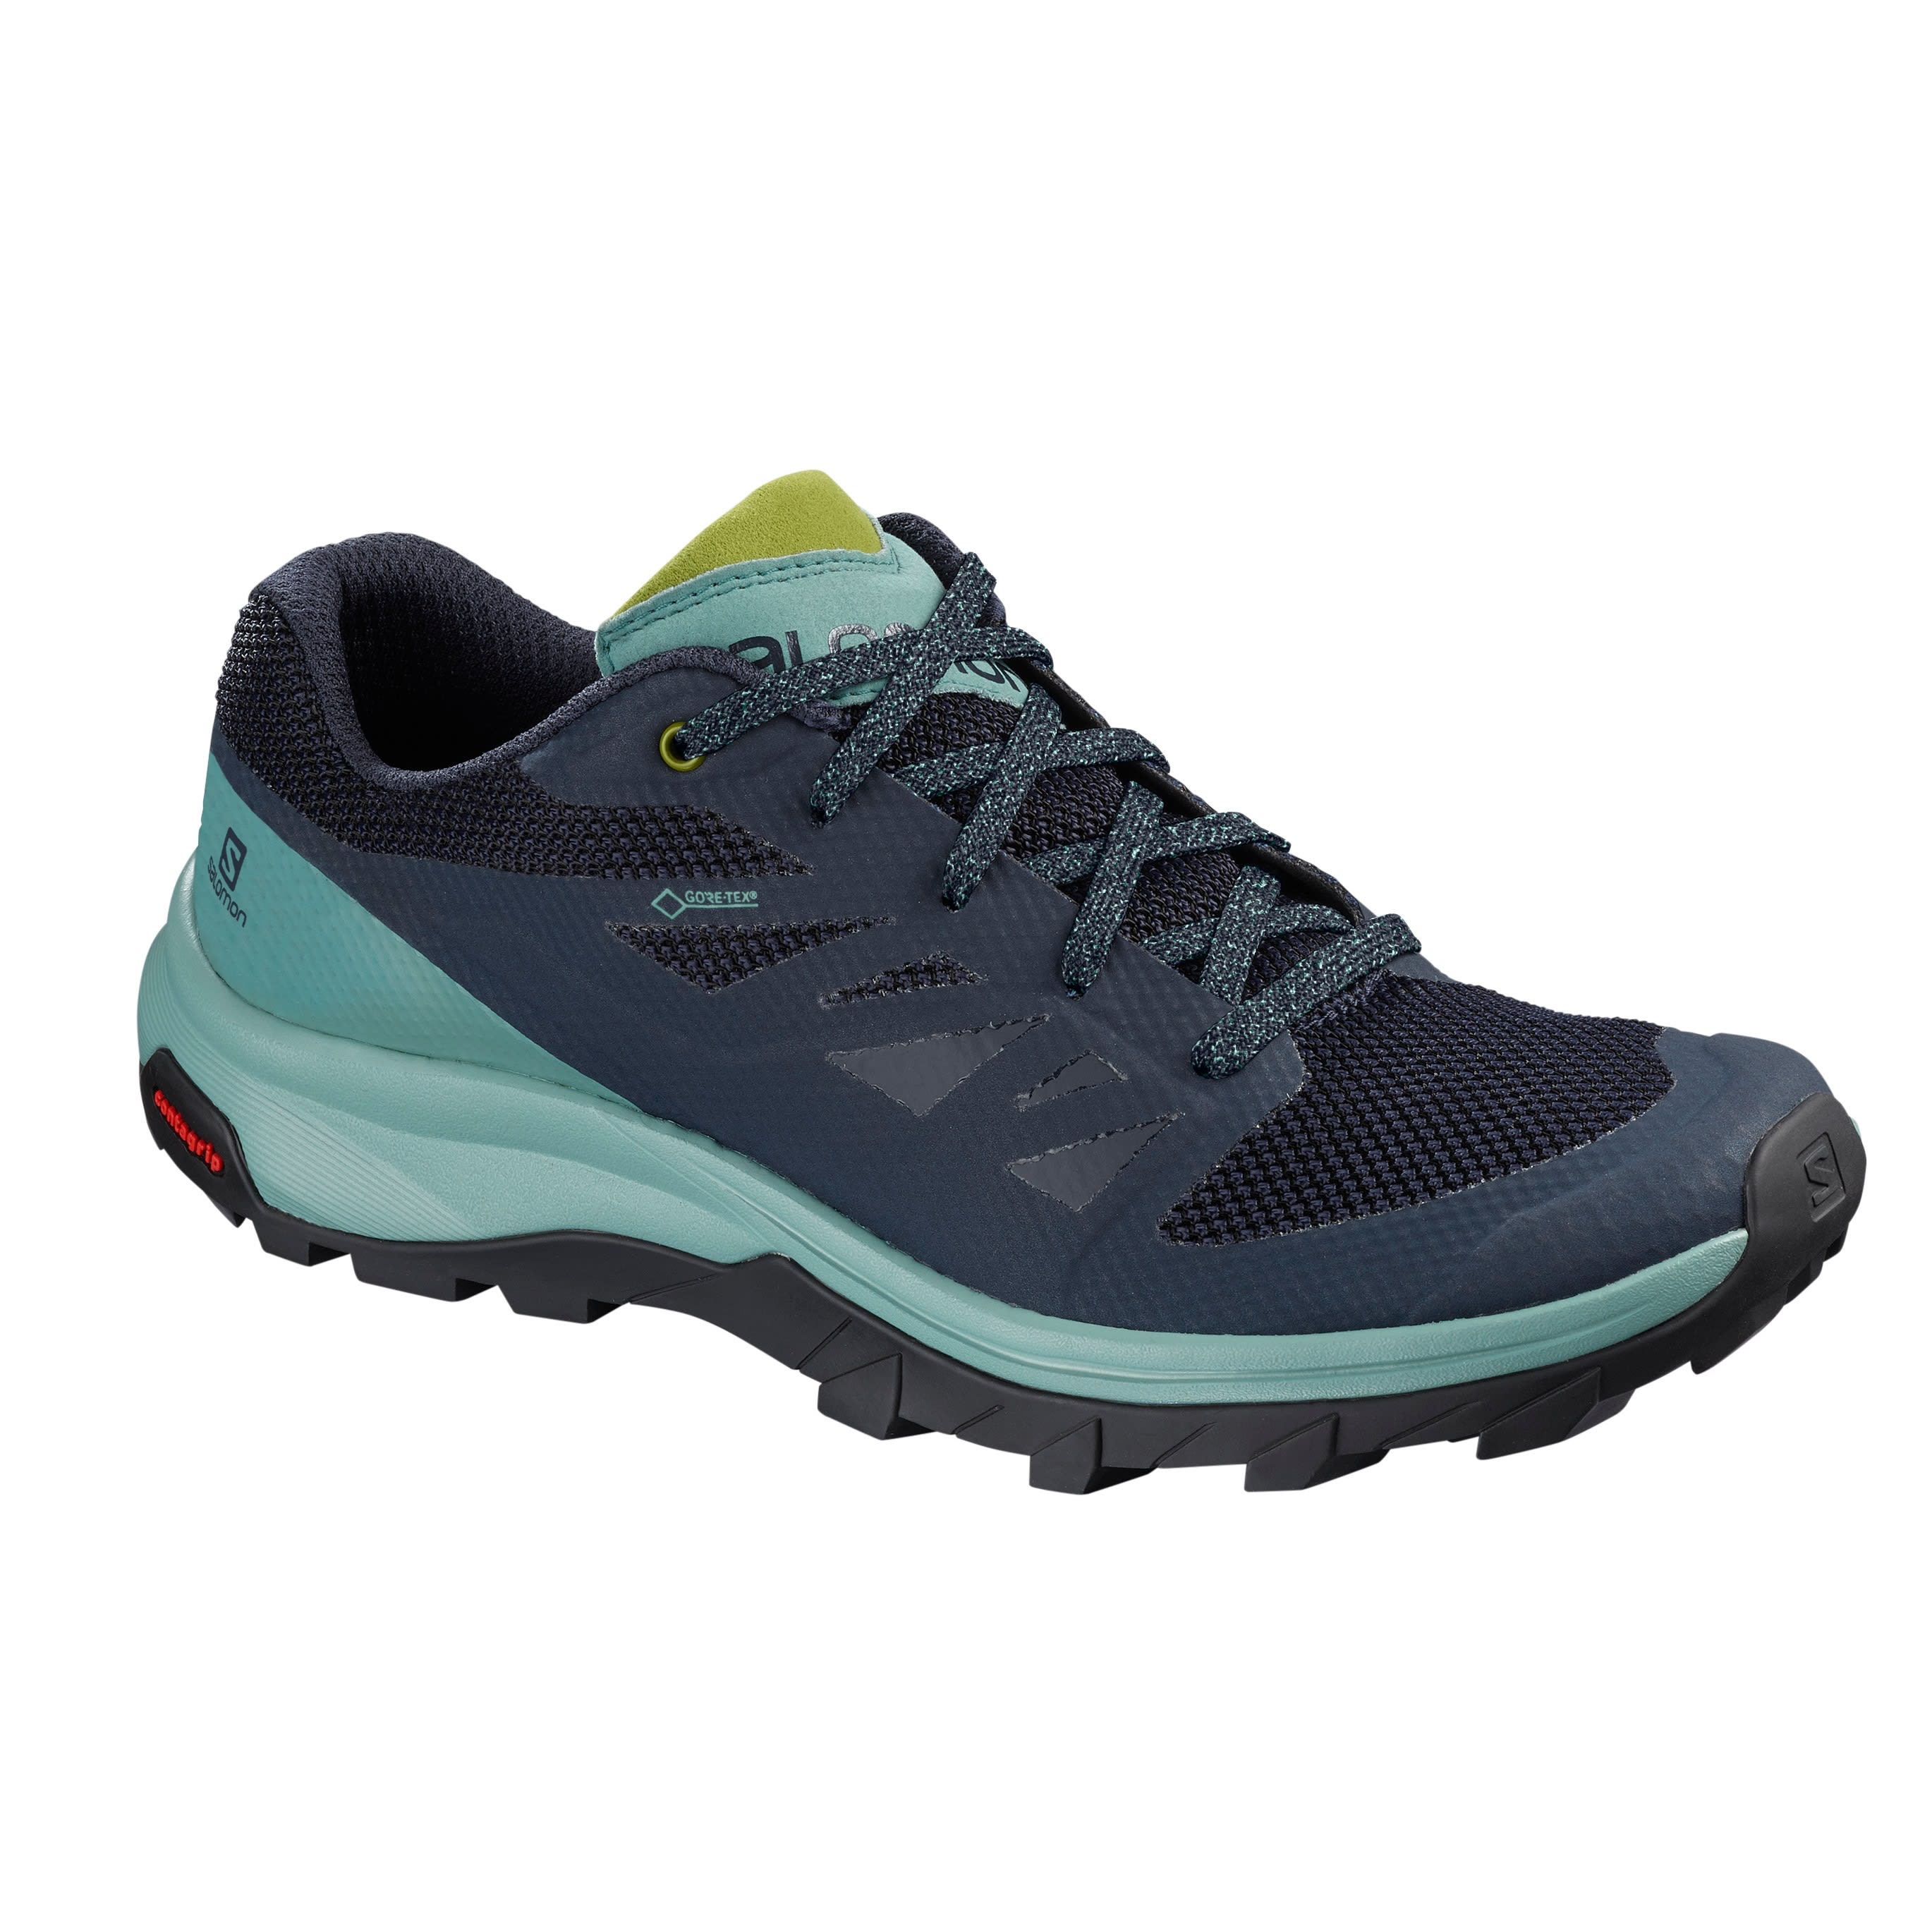 Buy Salomon Women's Outline Gore-Tex from Outnorth